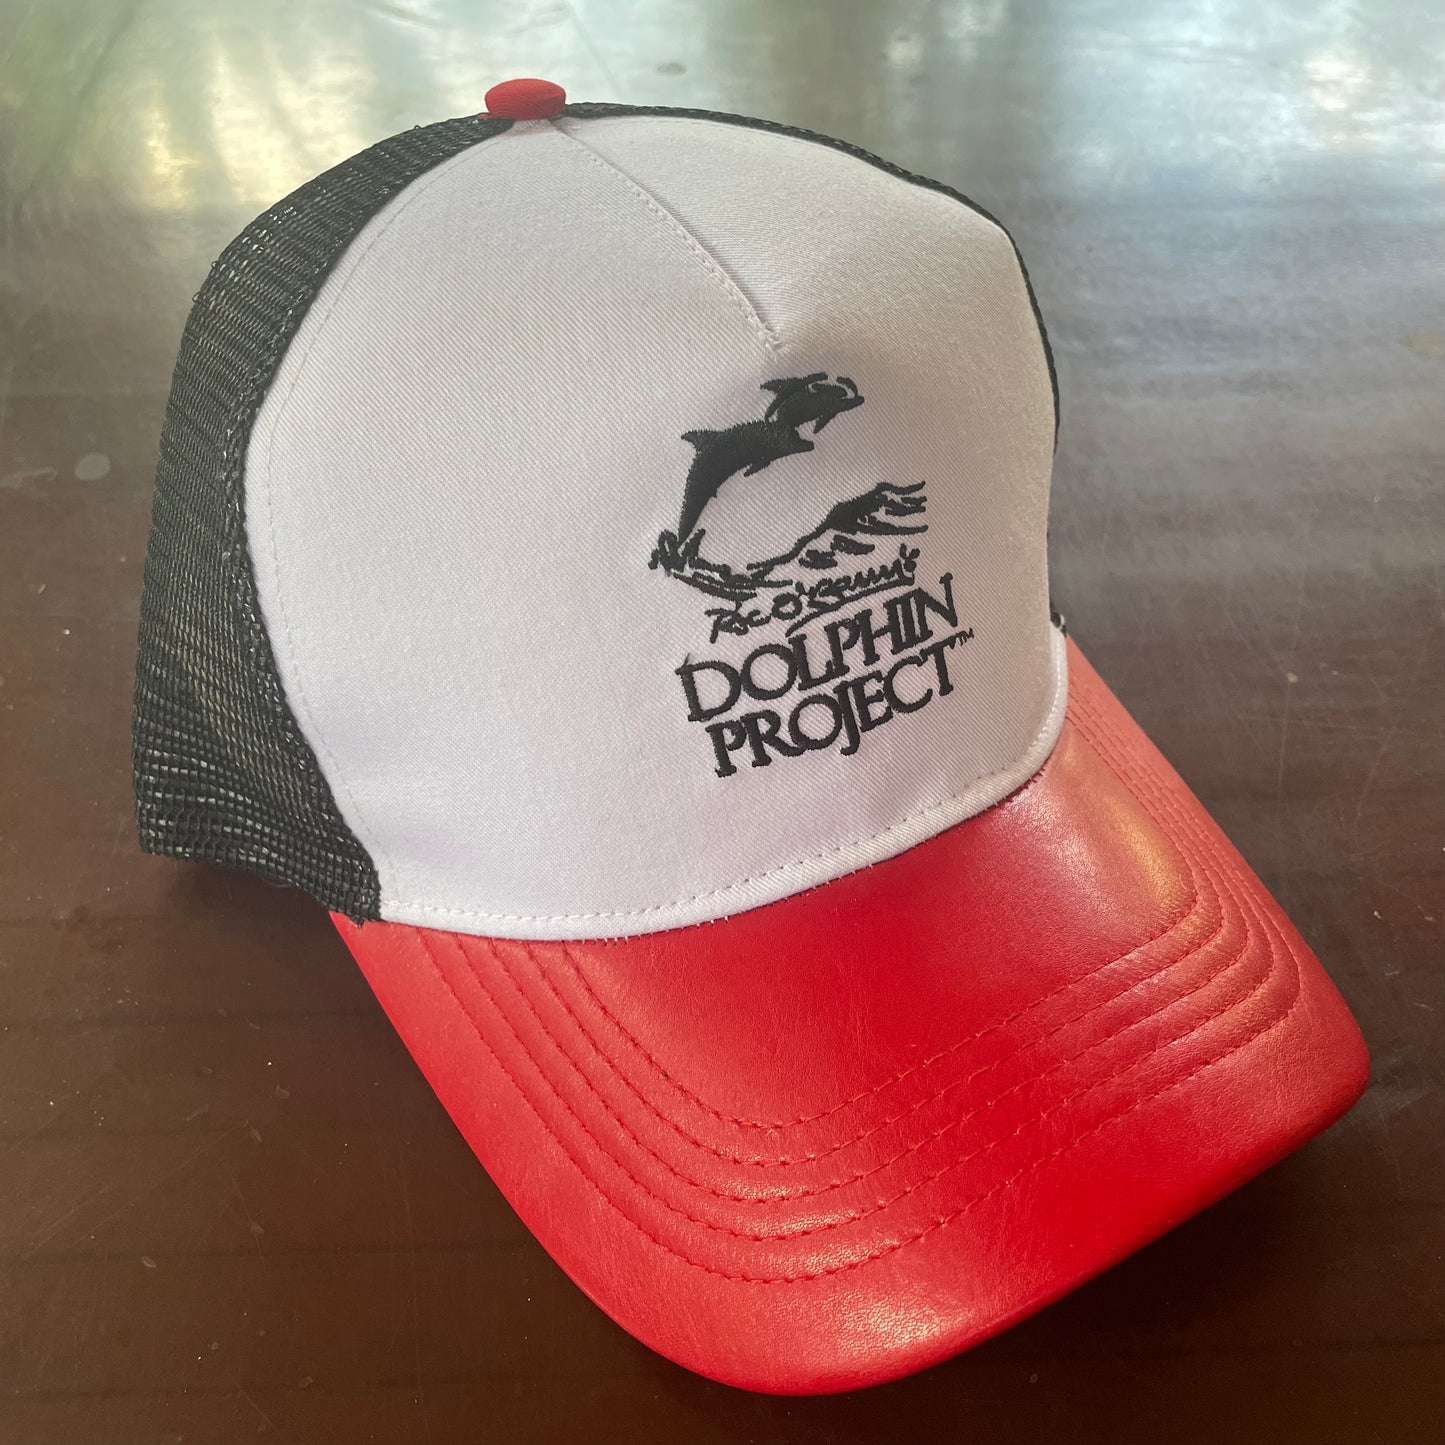 Dolphin Project Trucker Hat in red white and black